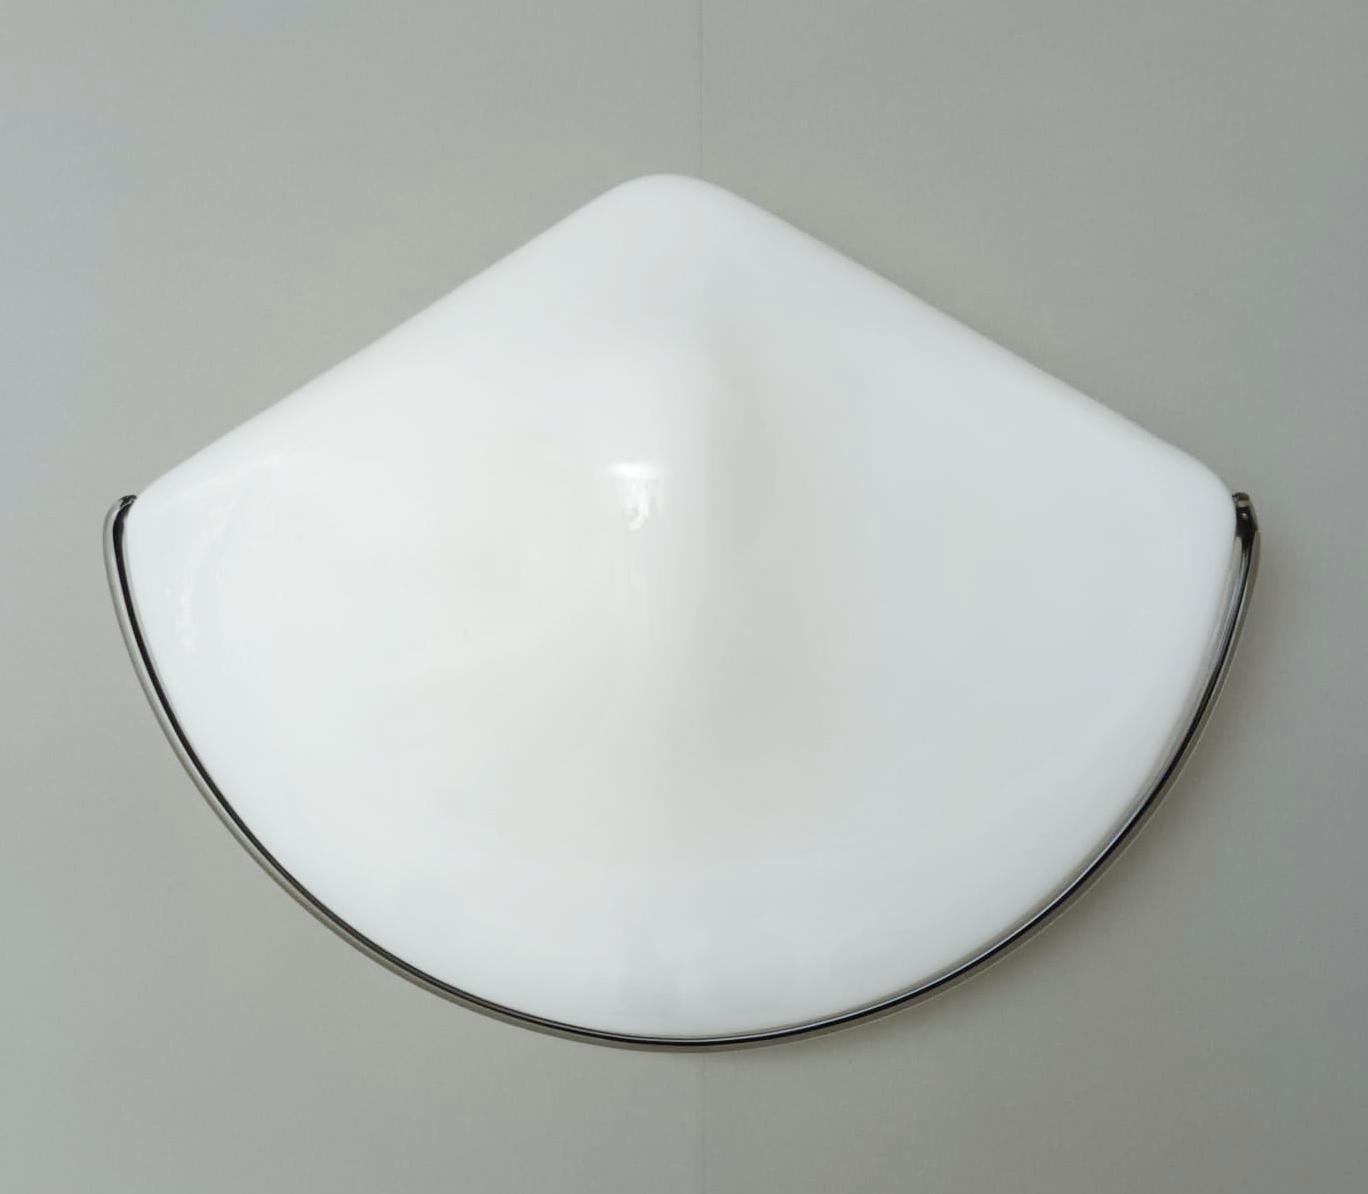 Vintage Italian wall light with triangular Murano glass shade in milky white color with black border / Made in Italy in the style of Vistosi, circa 1960s
Measures: height 12 inches, width 14.5 inches, height 5.5 inches
1 light / E26 or E27 type /